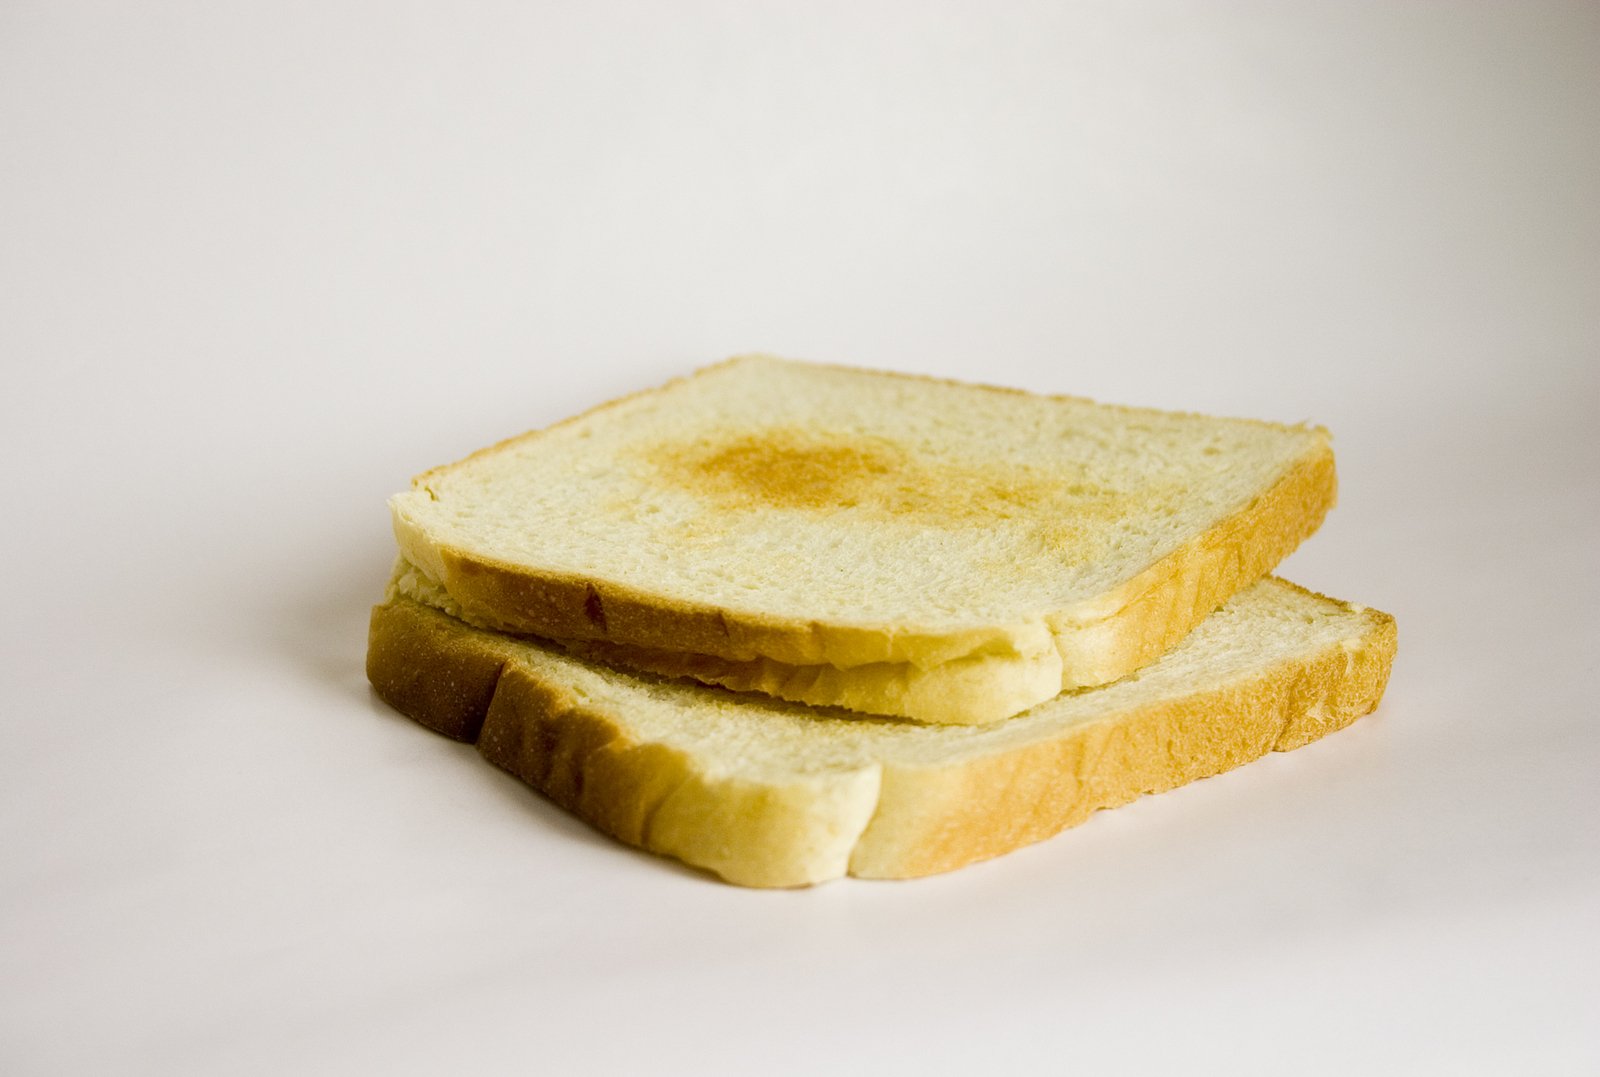 two slices of bread on a white surface